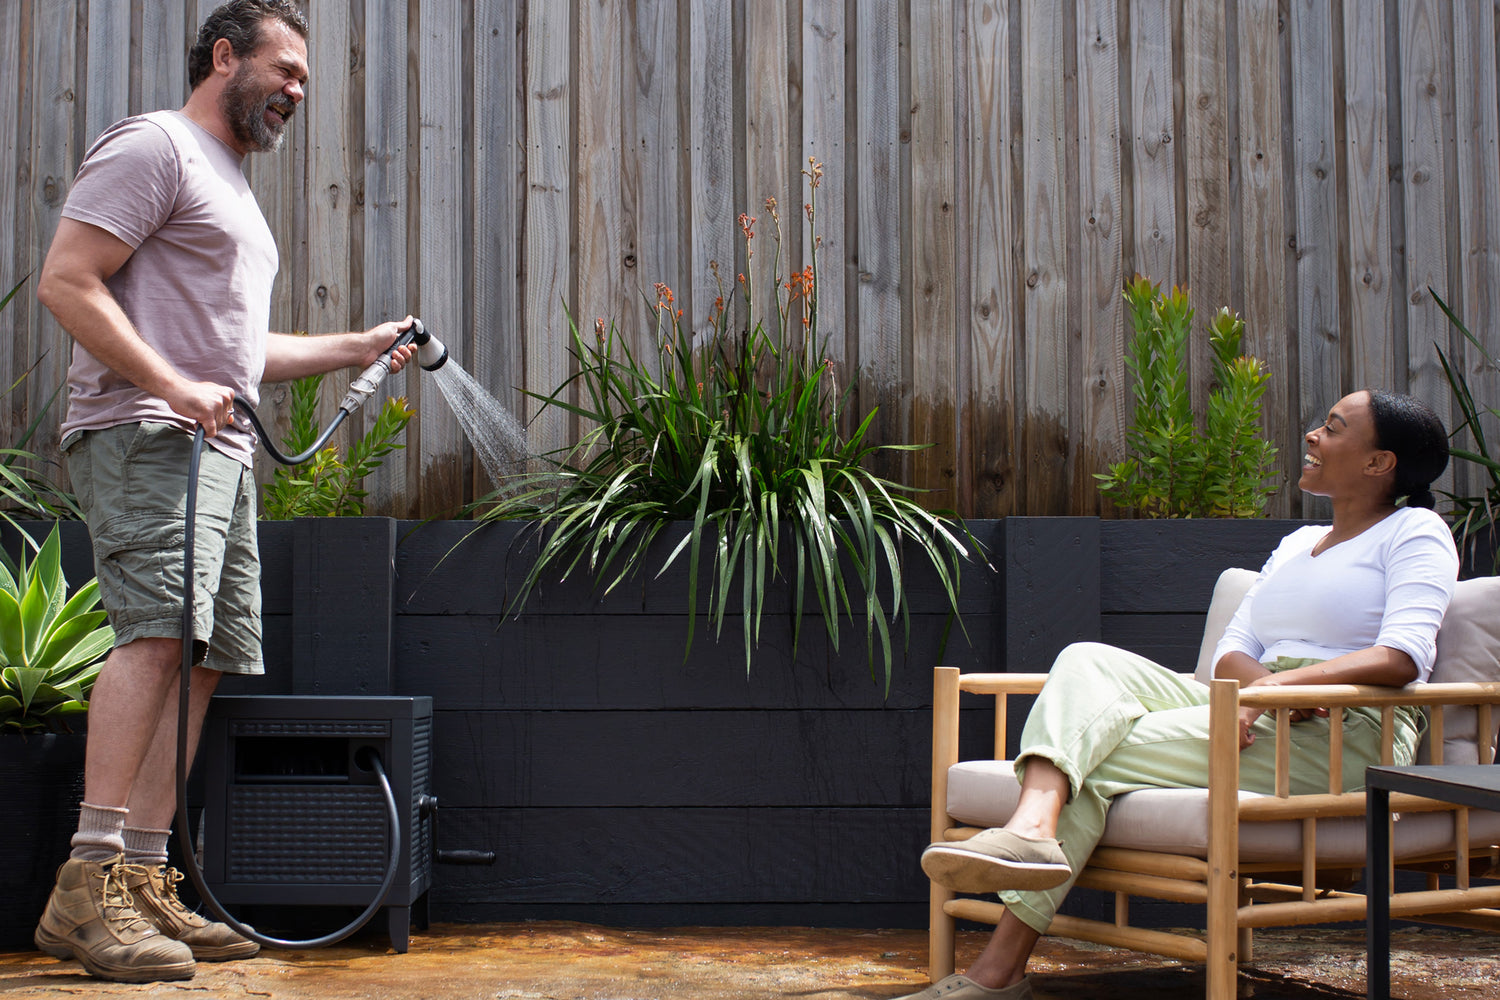 Man Watering His Plants With Charcoal Metal Hose Reel Box With Woman Resting On Outdoor Furniture